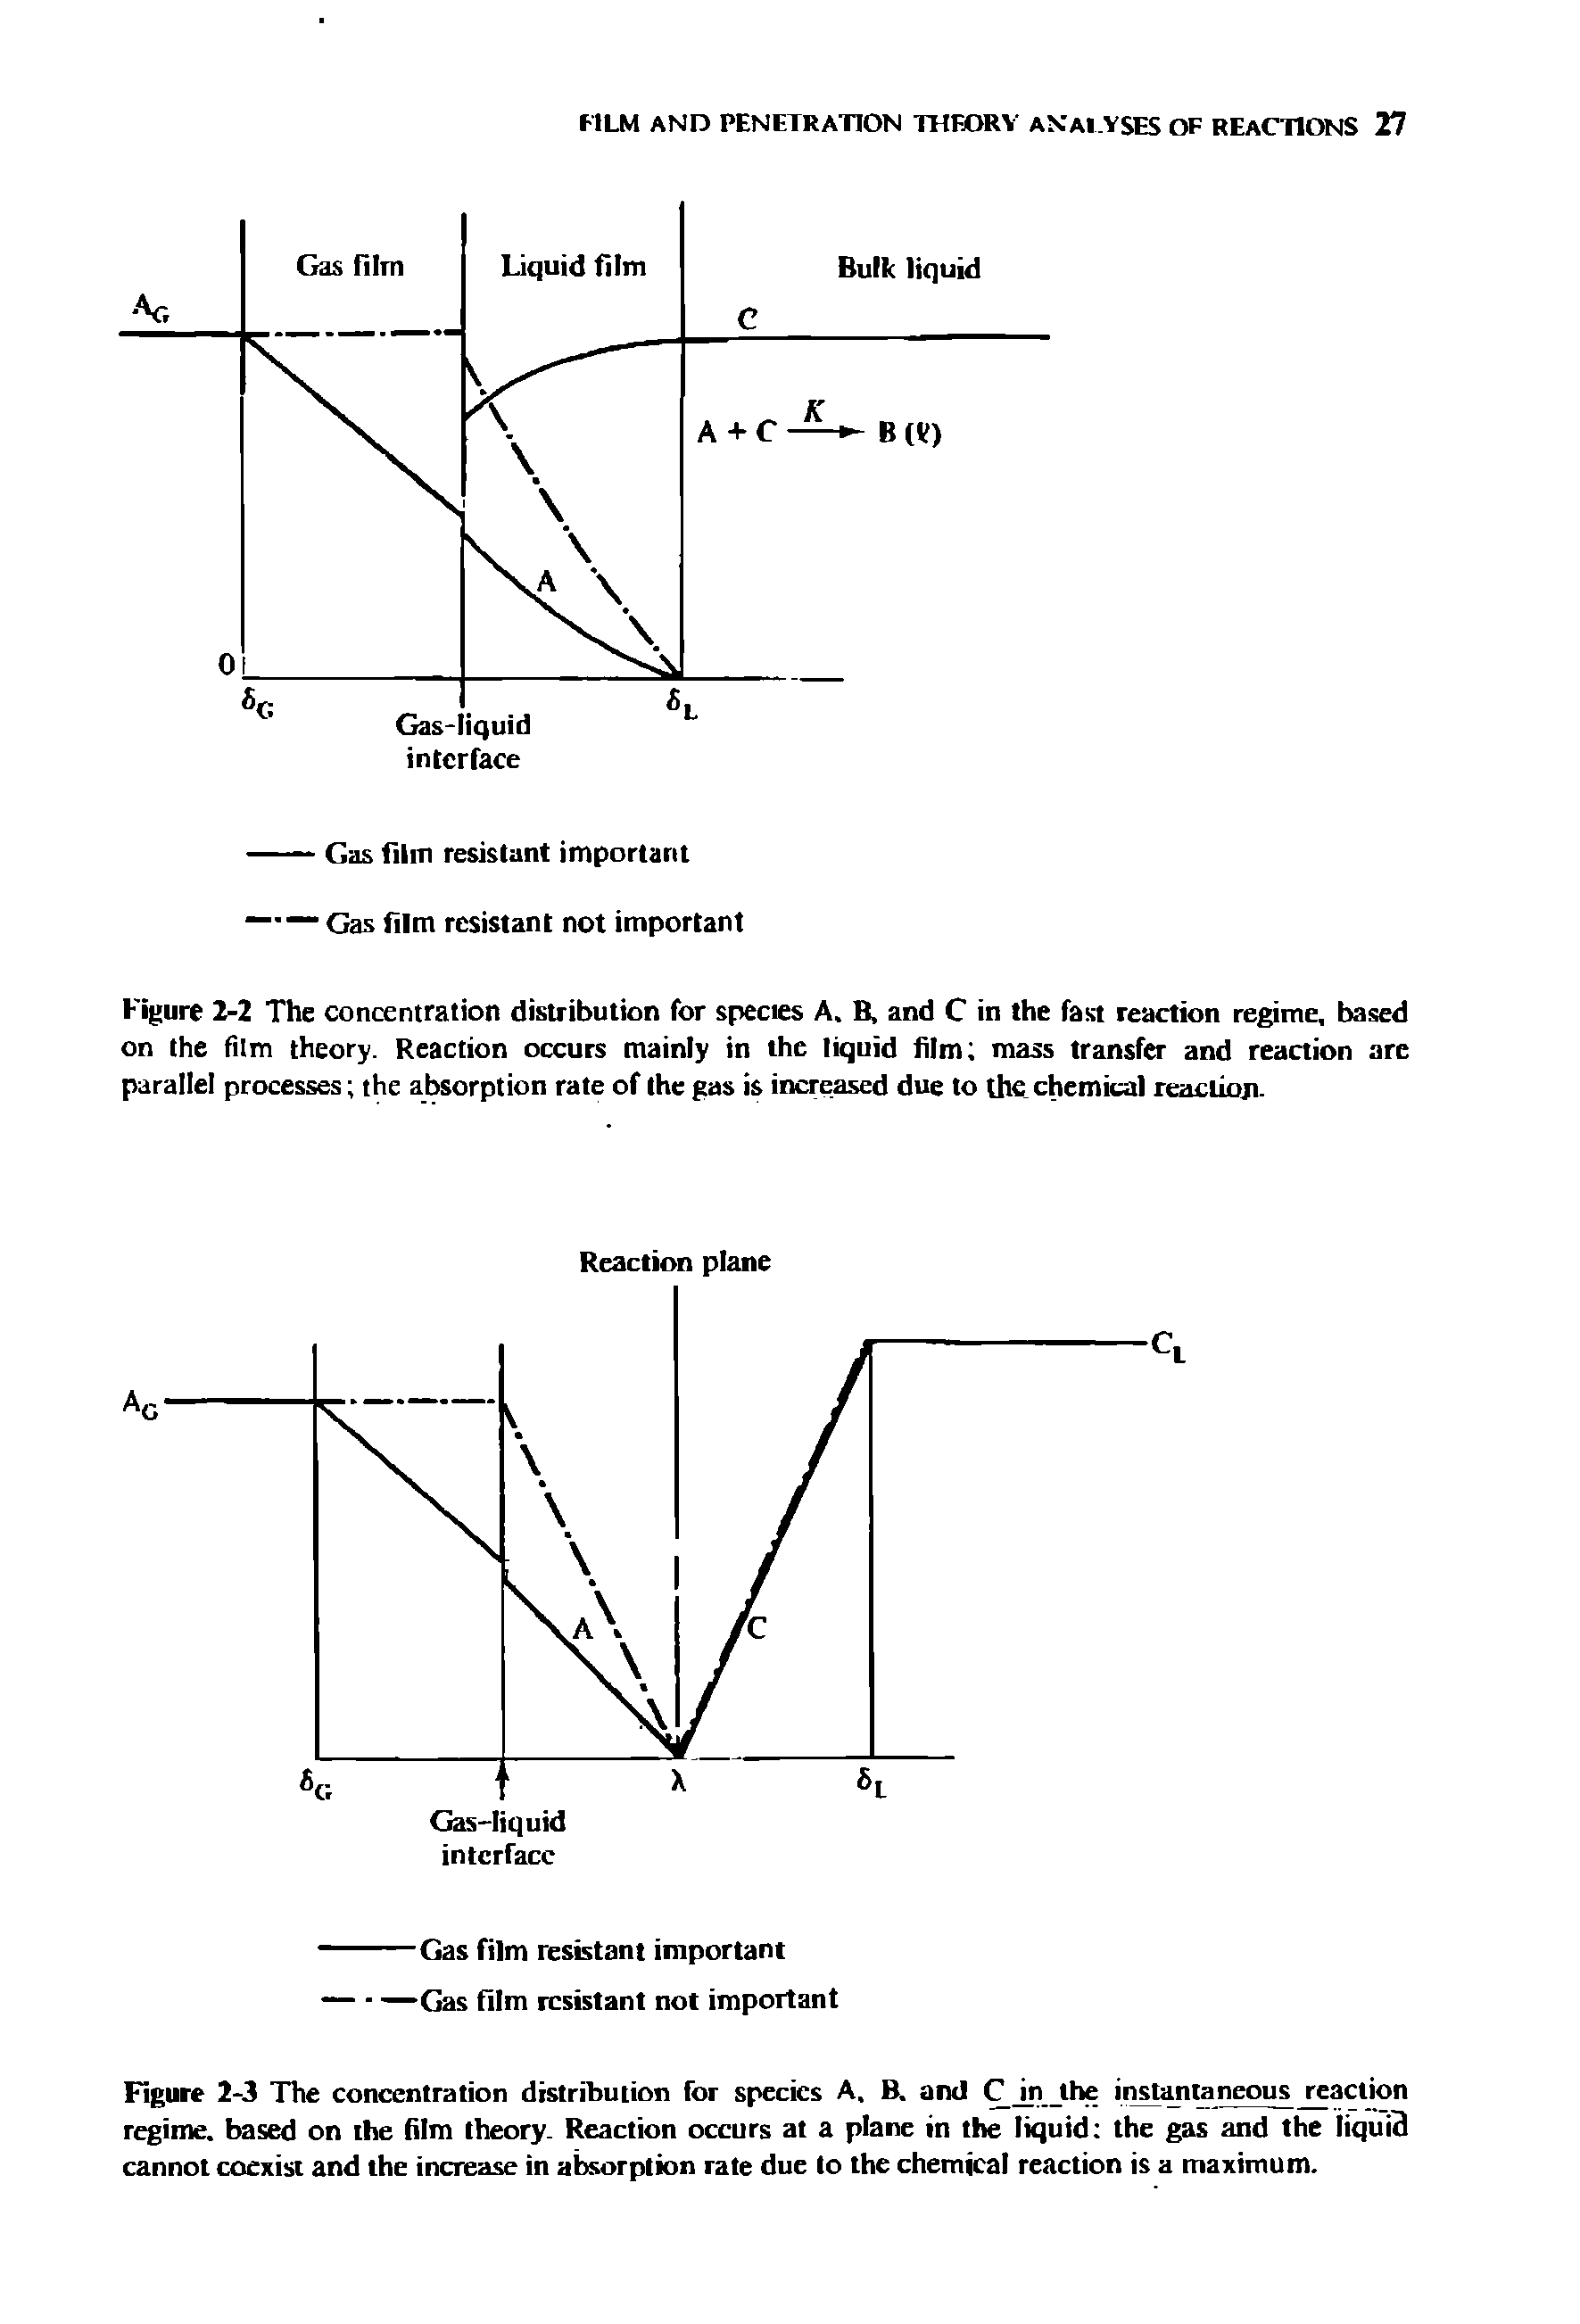 Figure 2-2 The concentration distribution for species A. B, and C in the fast reaction regime, based on the film theory. Reaction occurs mainly in the liquid film mass transfer and reaction are parallel processes the absorption rate of the gas is increased due to the chemical reaction...